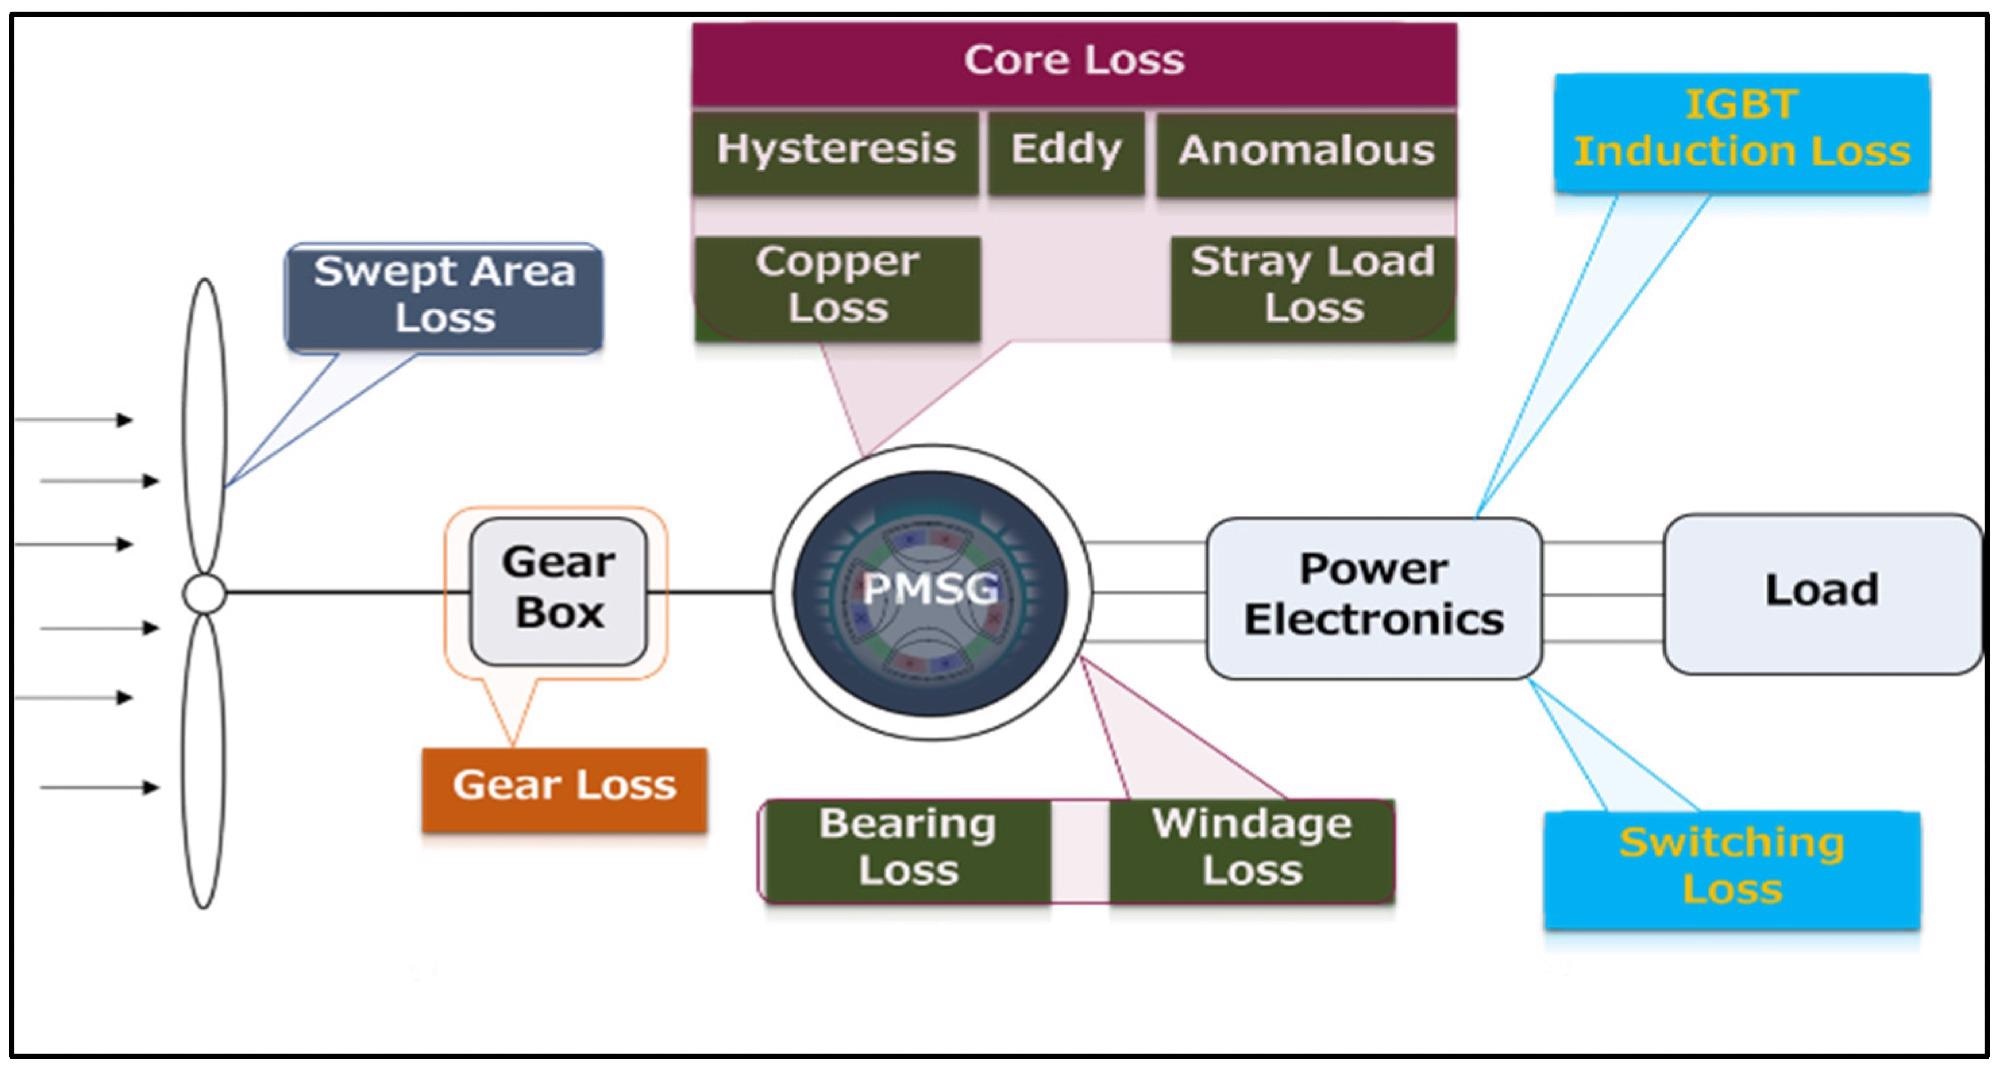 Wind turbine power train and types of distributed losses.